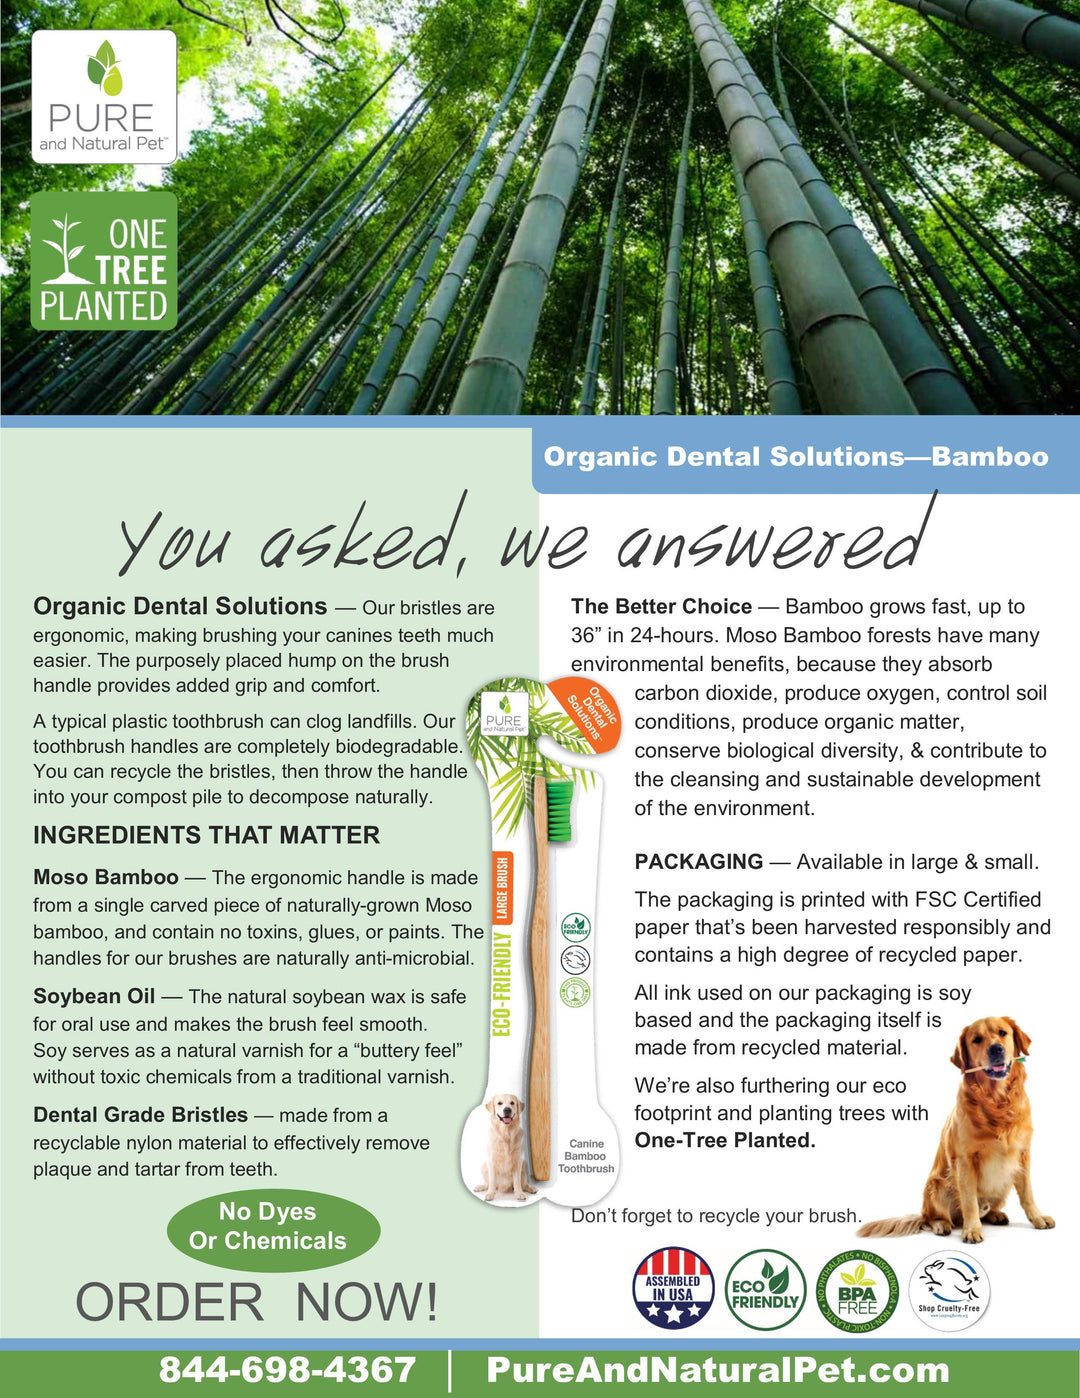 Organic Dental Bamboo Toothbrush for Dogs - Large